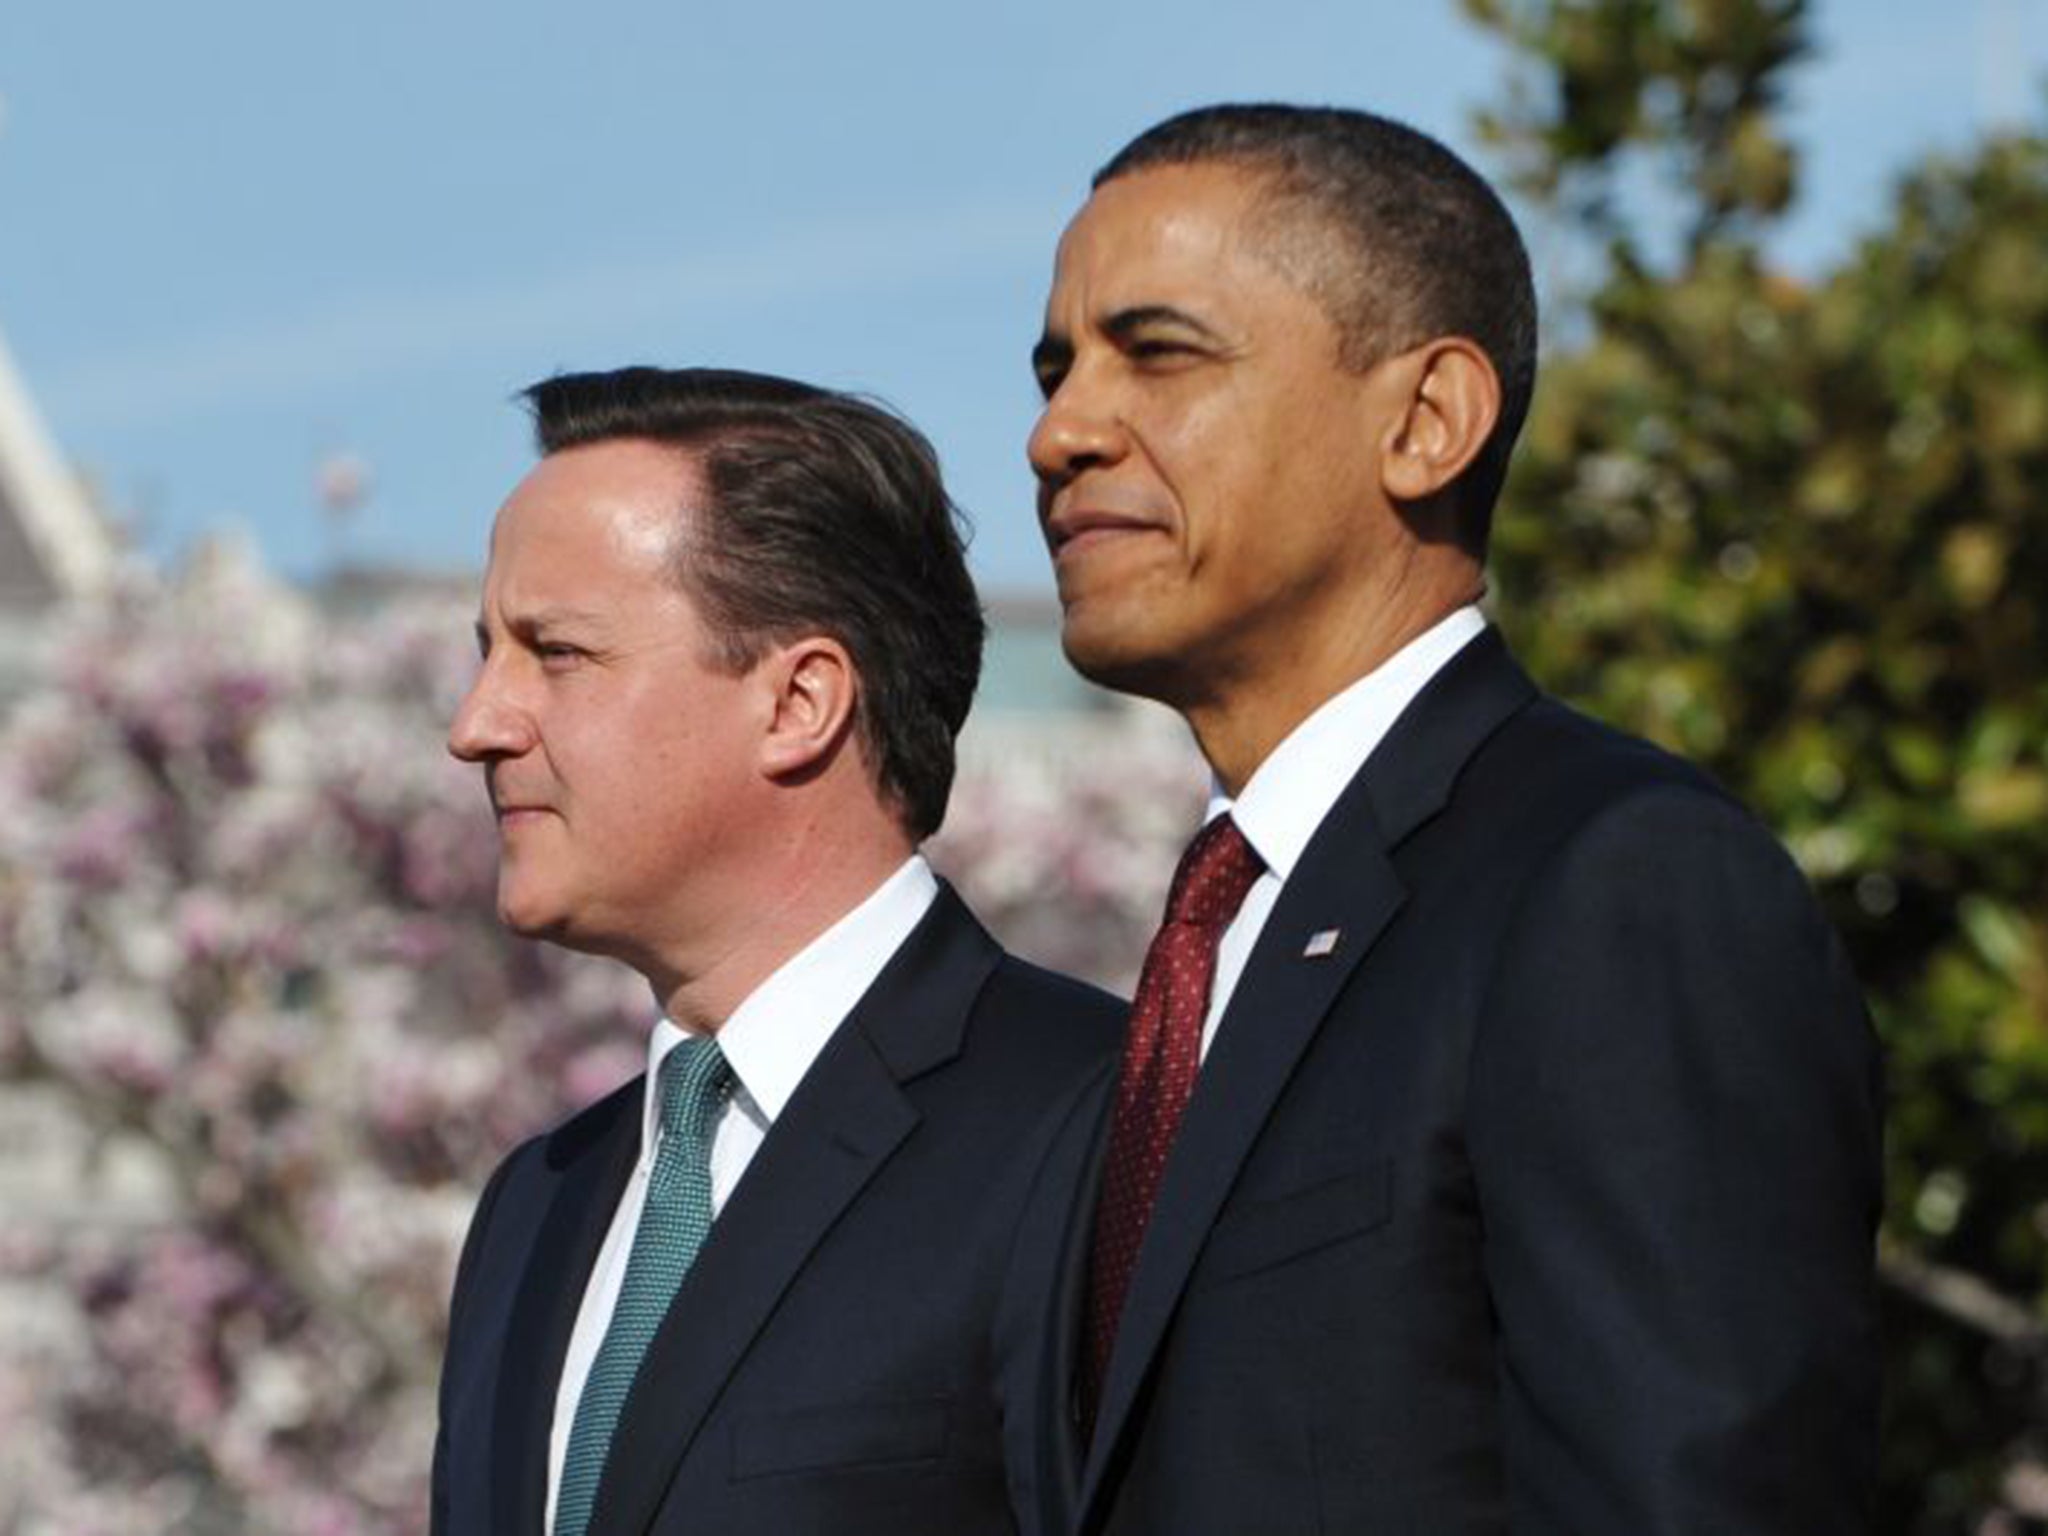 David Cameron and Barack Obama have pledged to work together to learn how to beat hackers